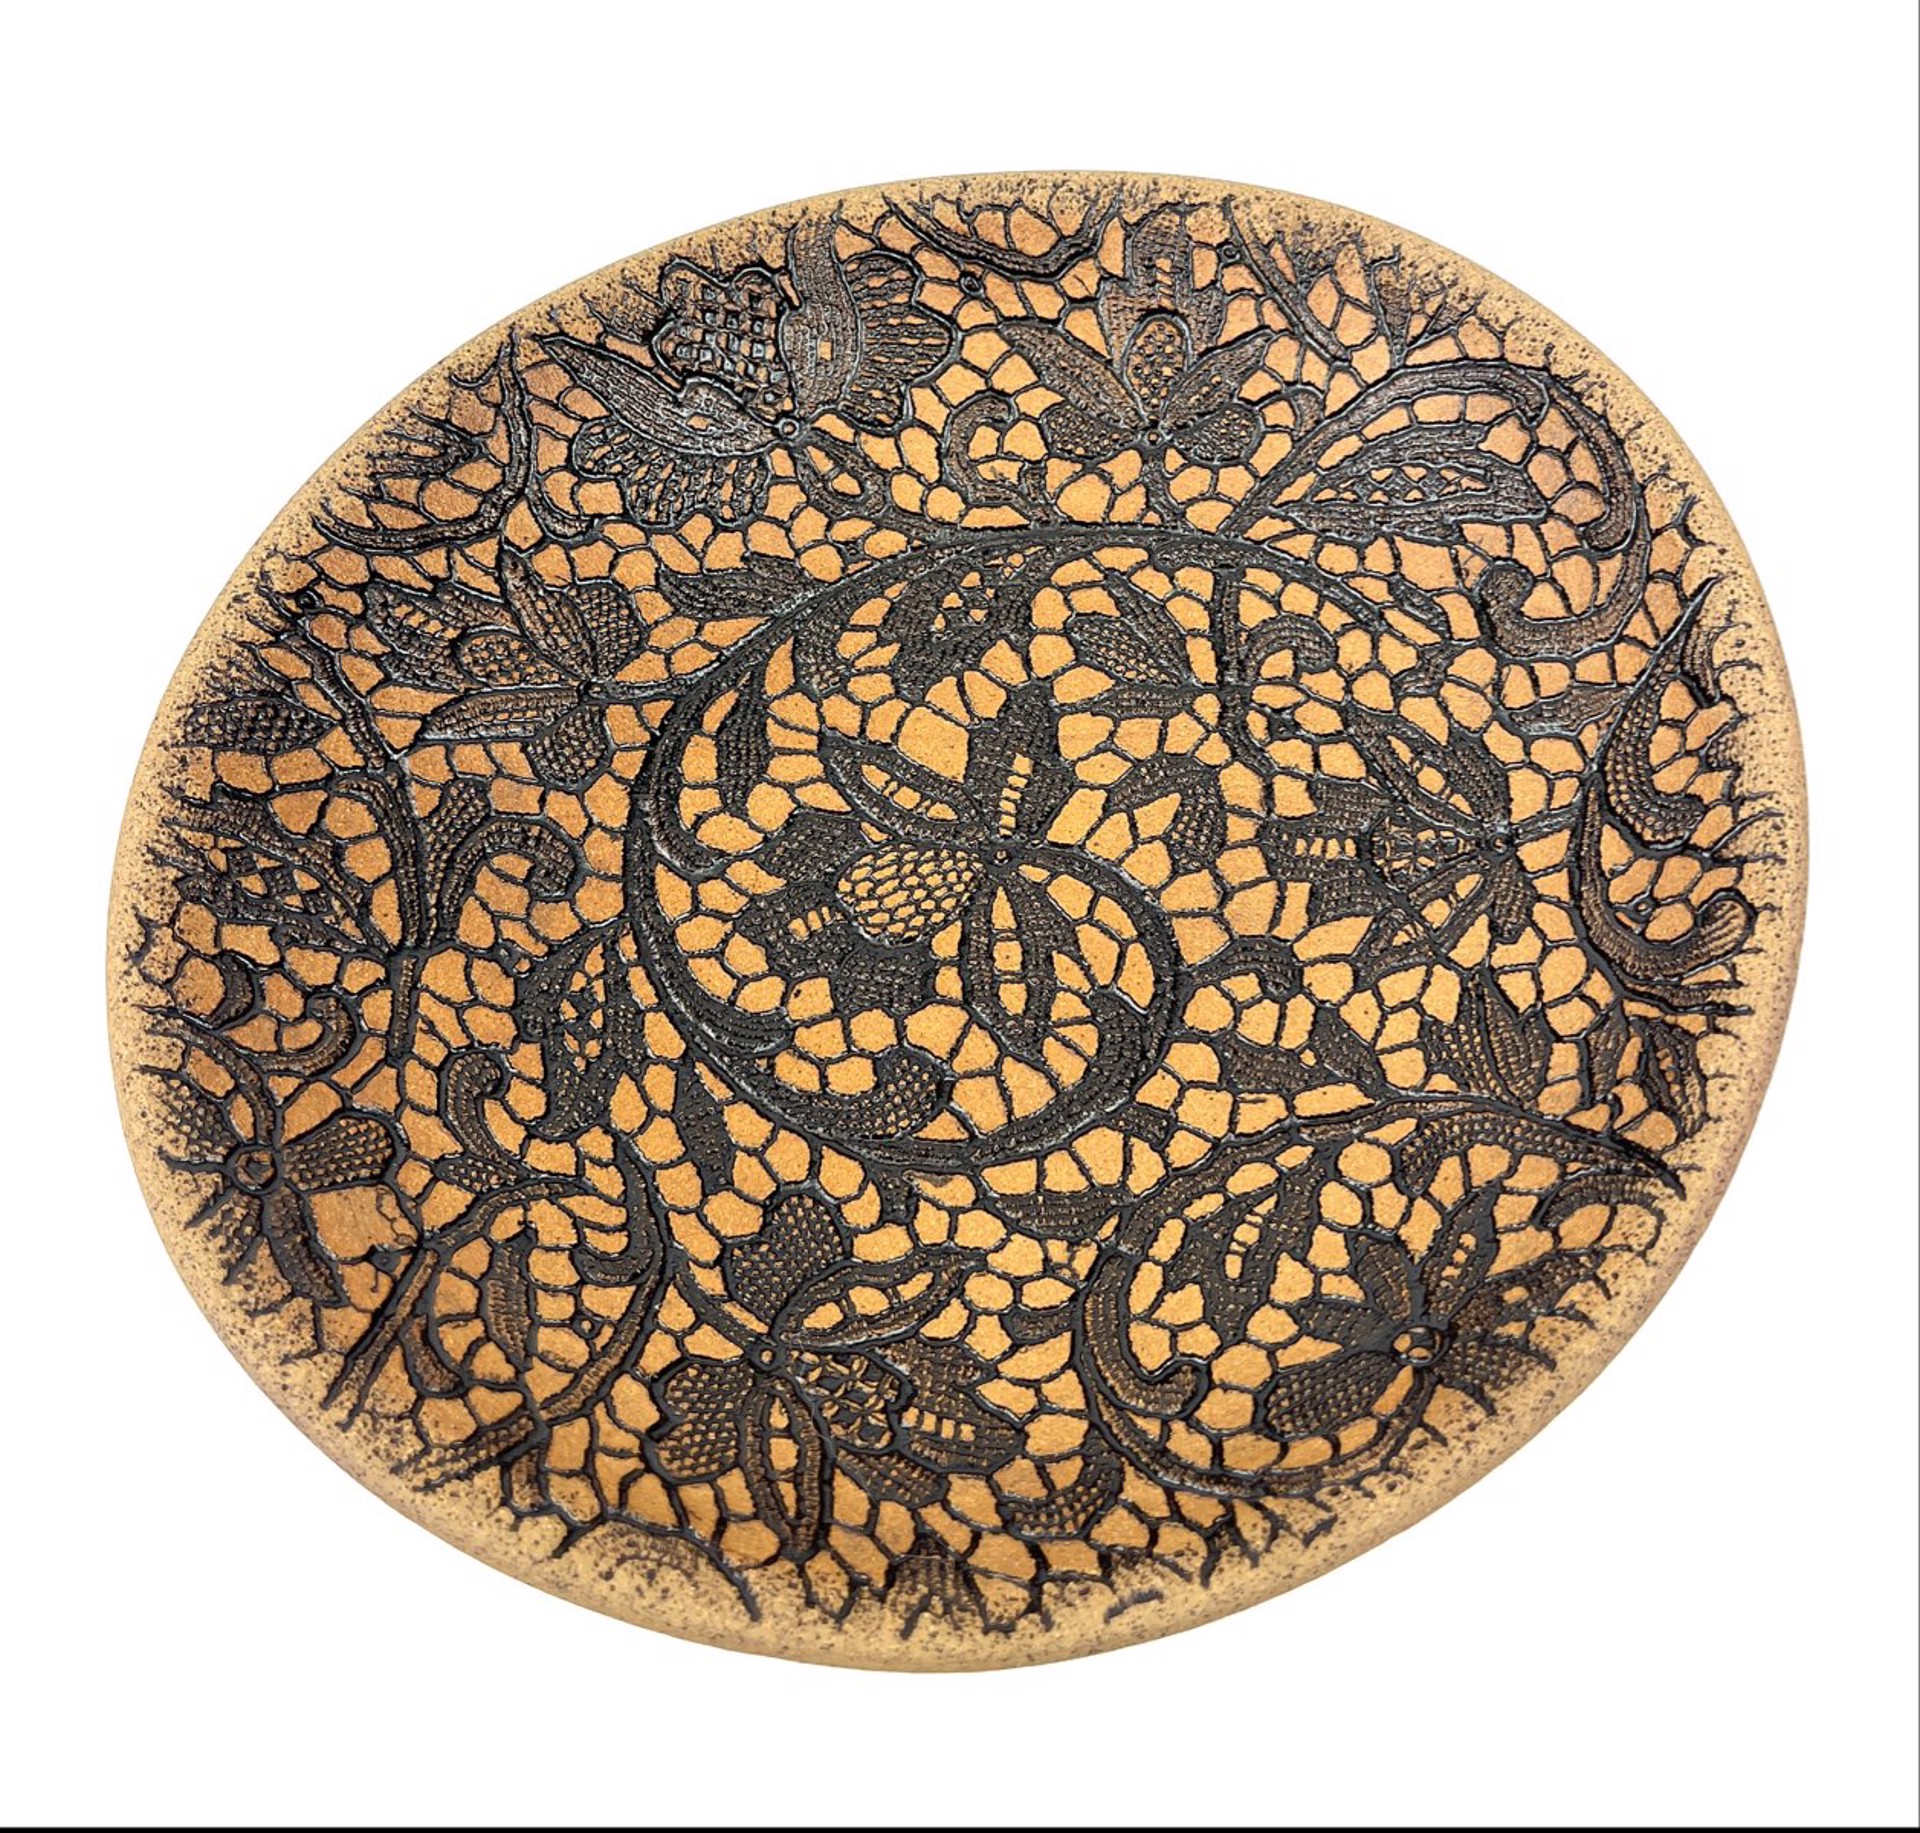 Hand Carved Ceramic Bowl by Kelly Jean Ohl